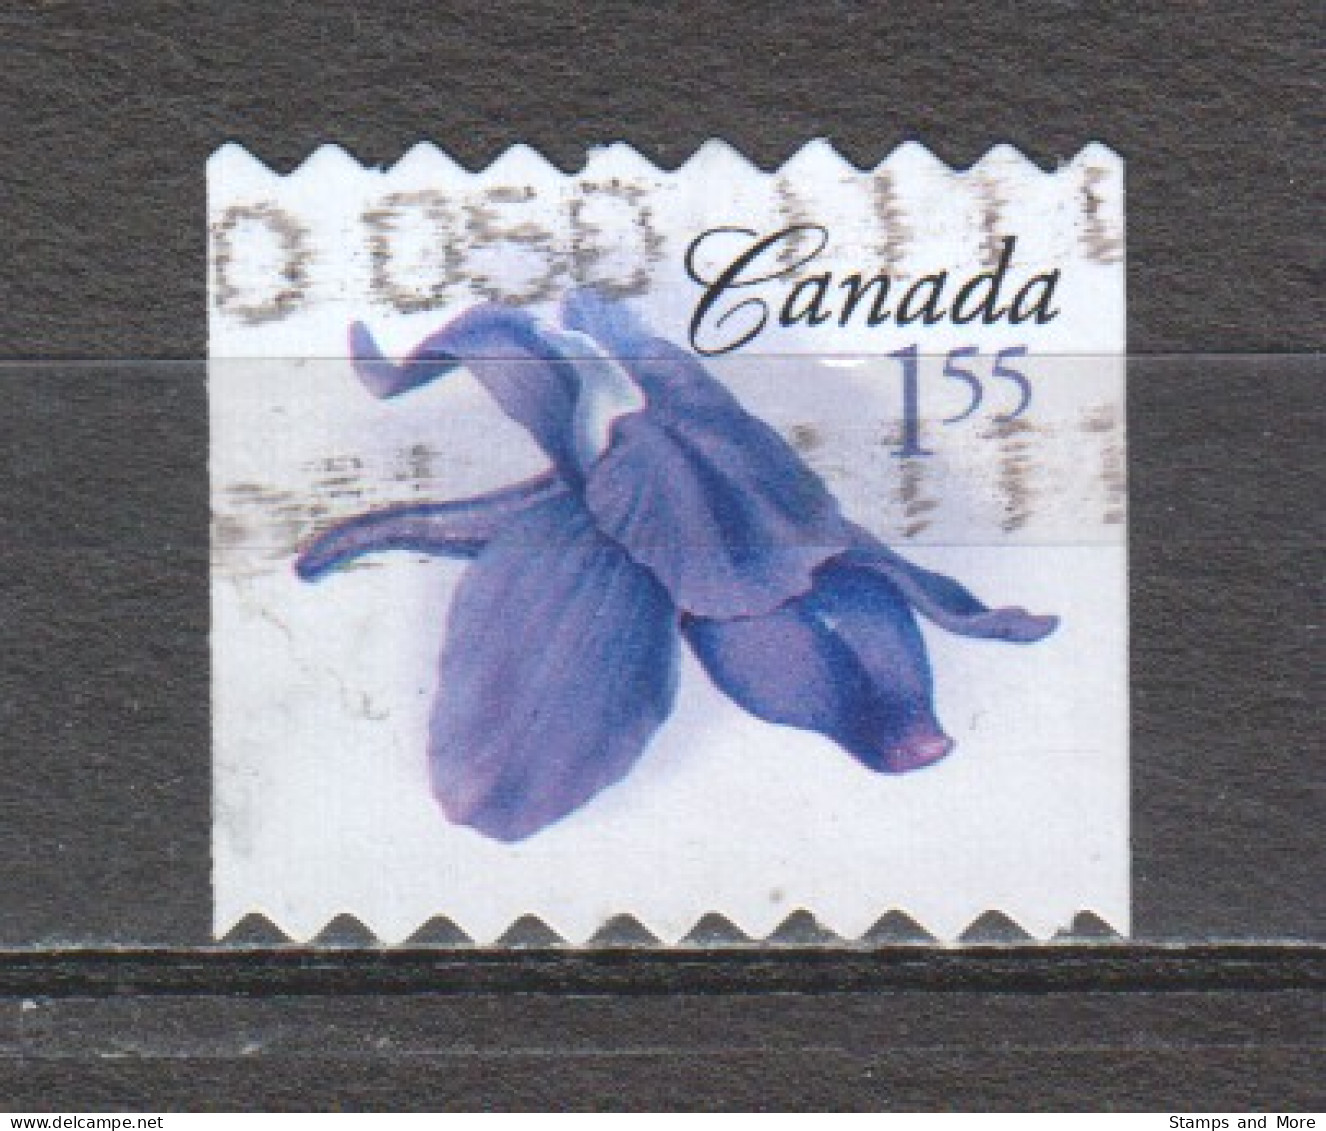 Canada 2006 Mi 2387BC Canceled (2) - Used Stamps